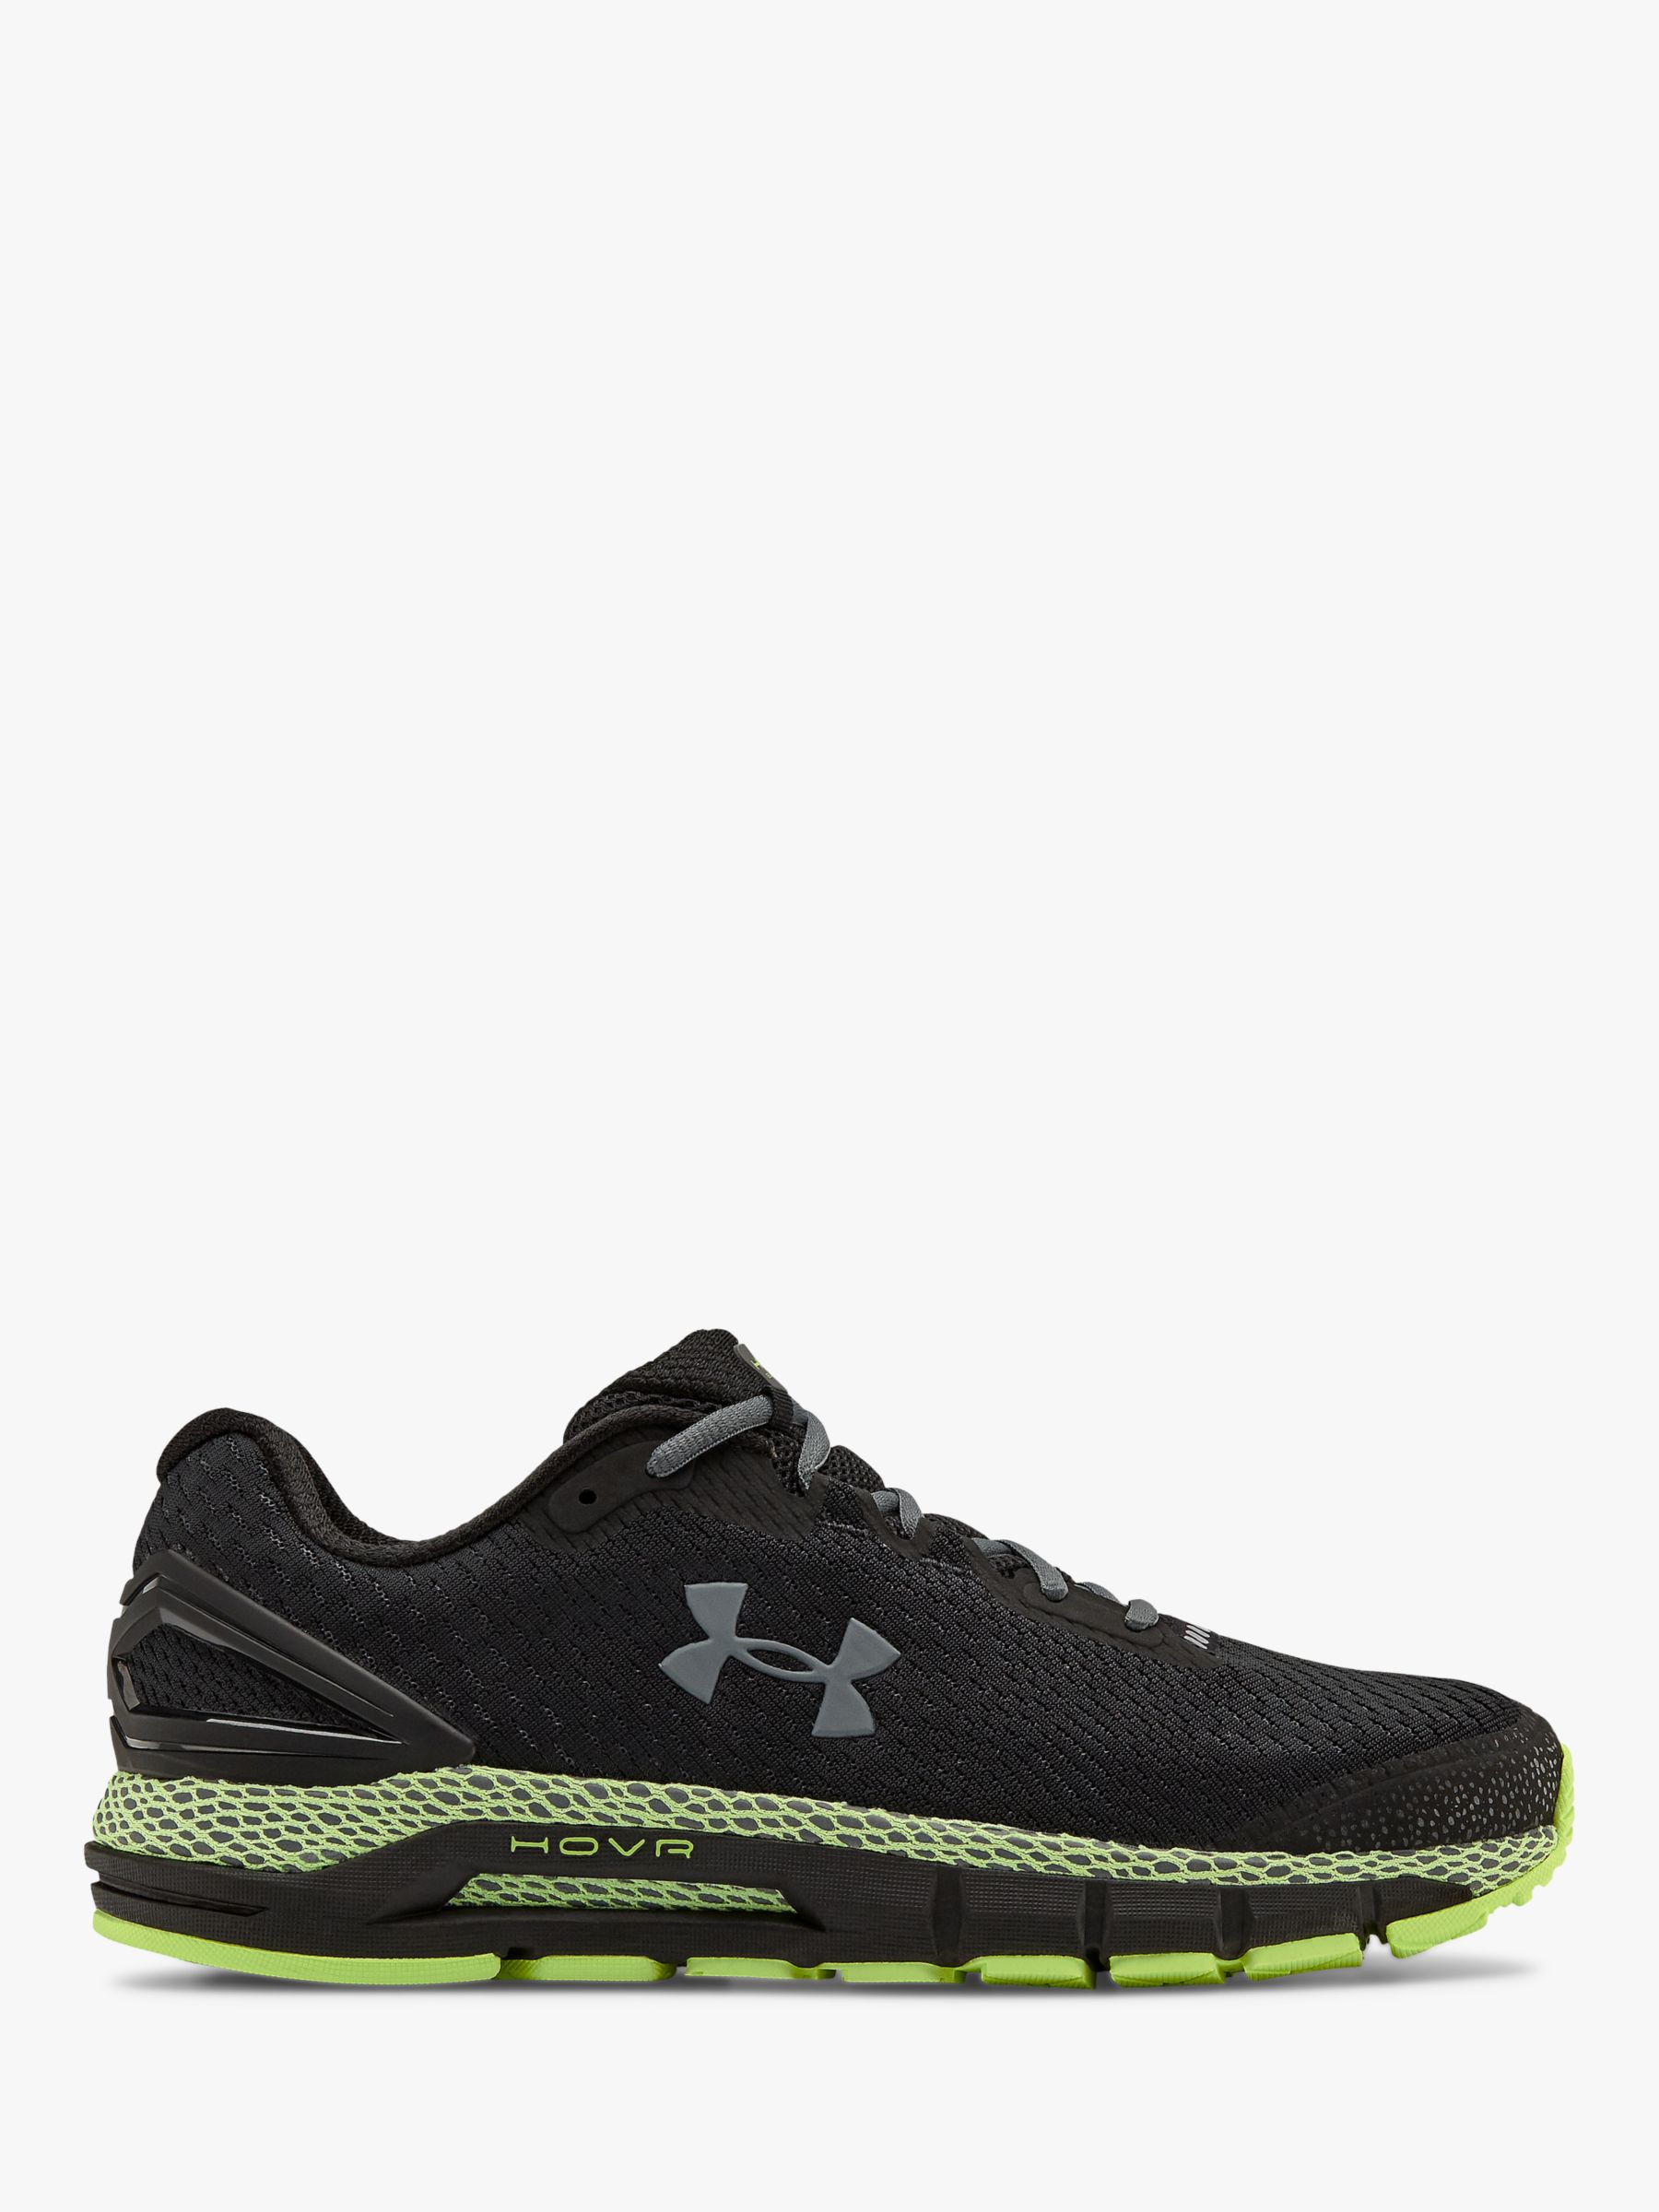 black and grey under armour shoes